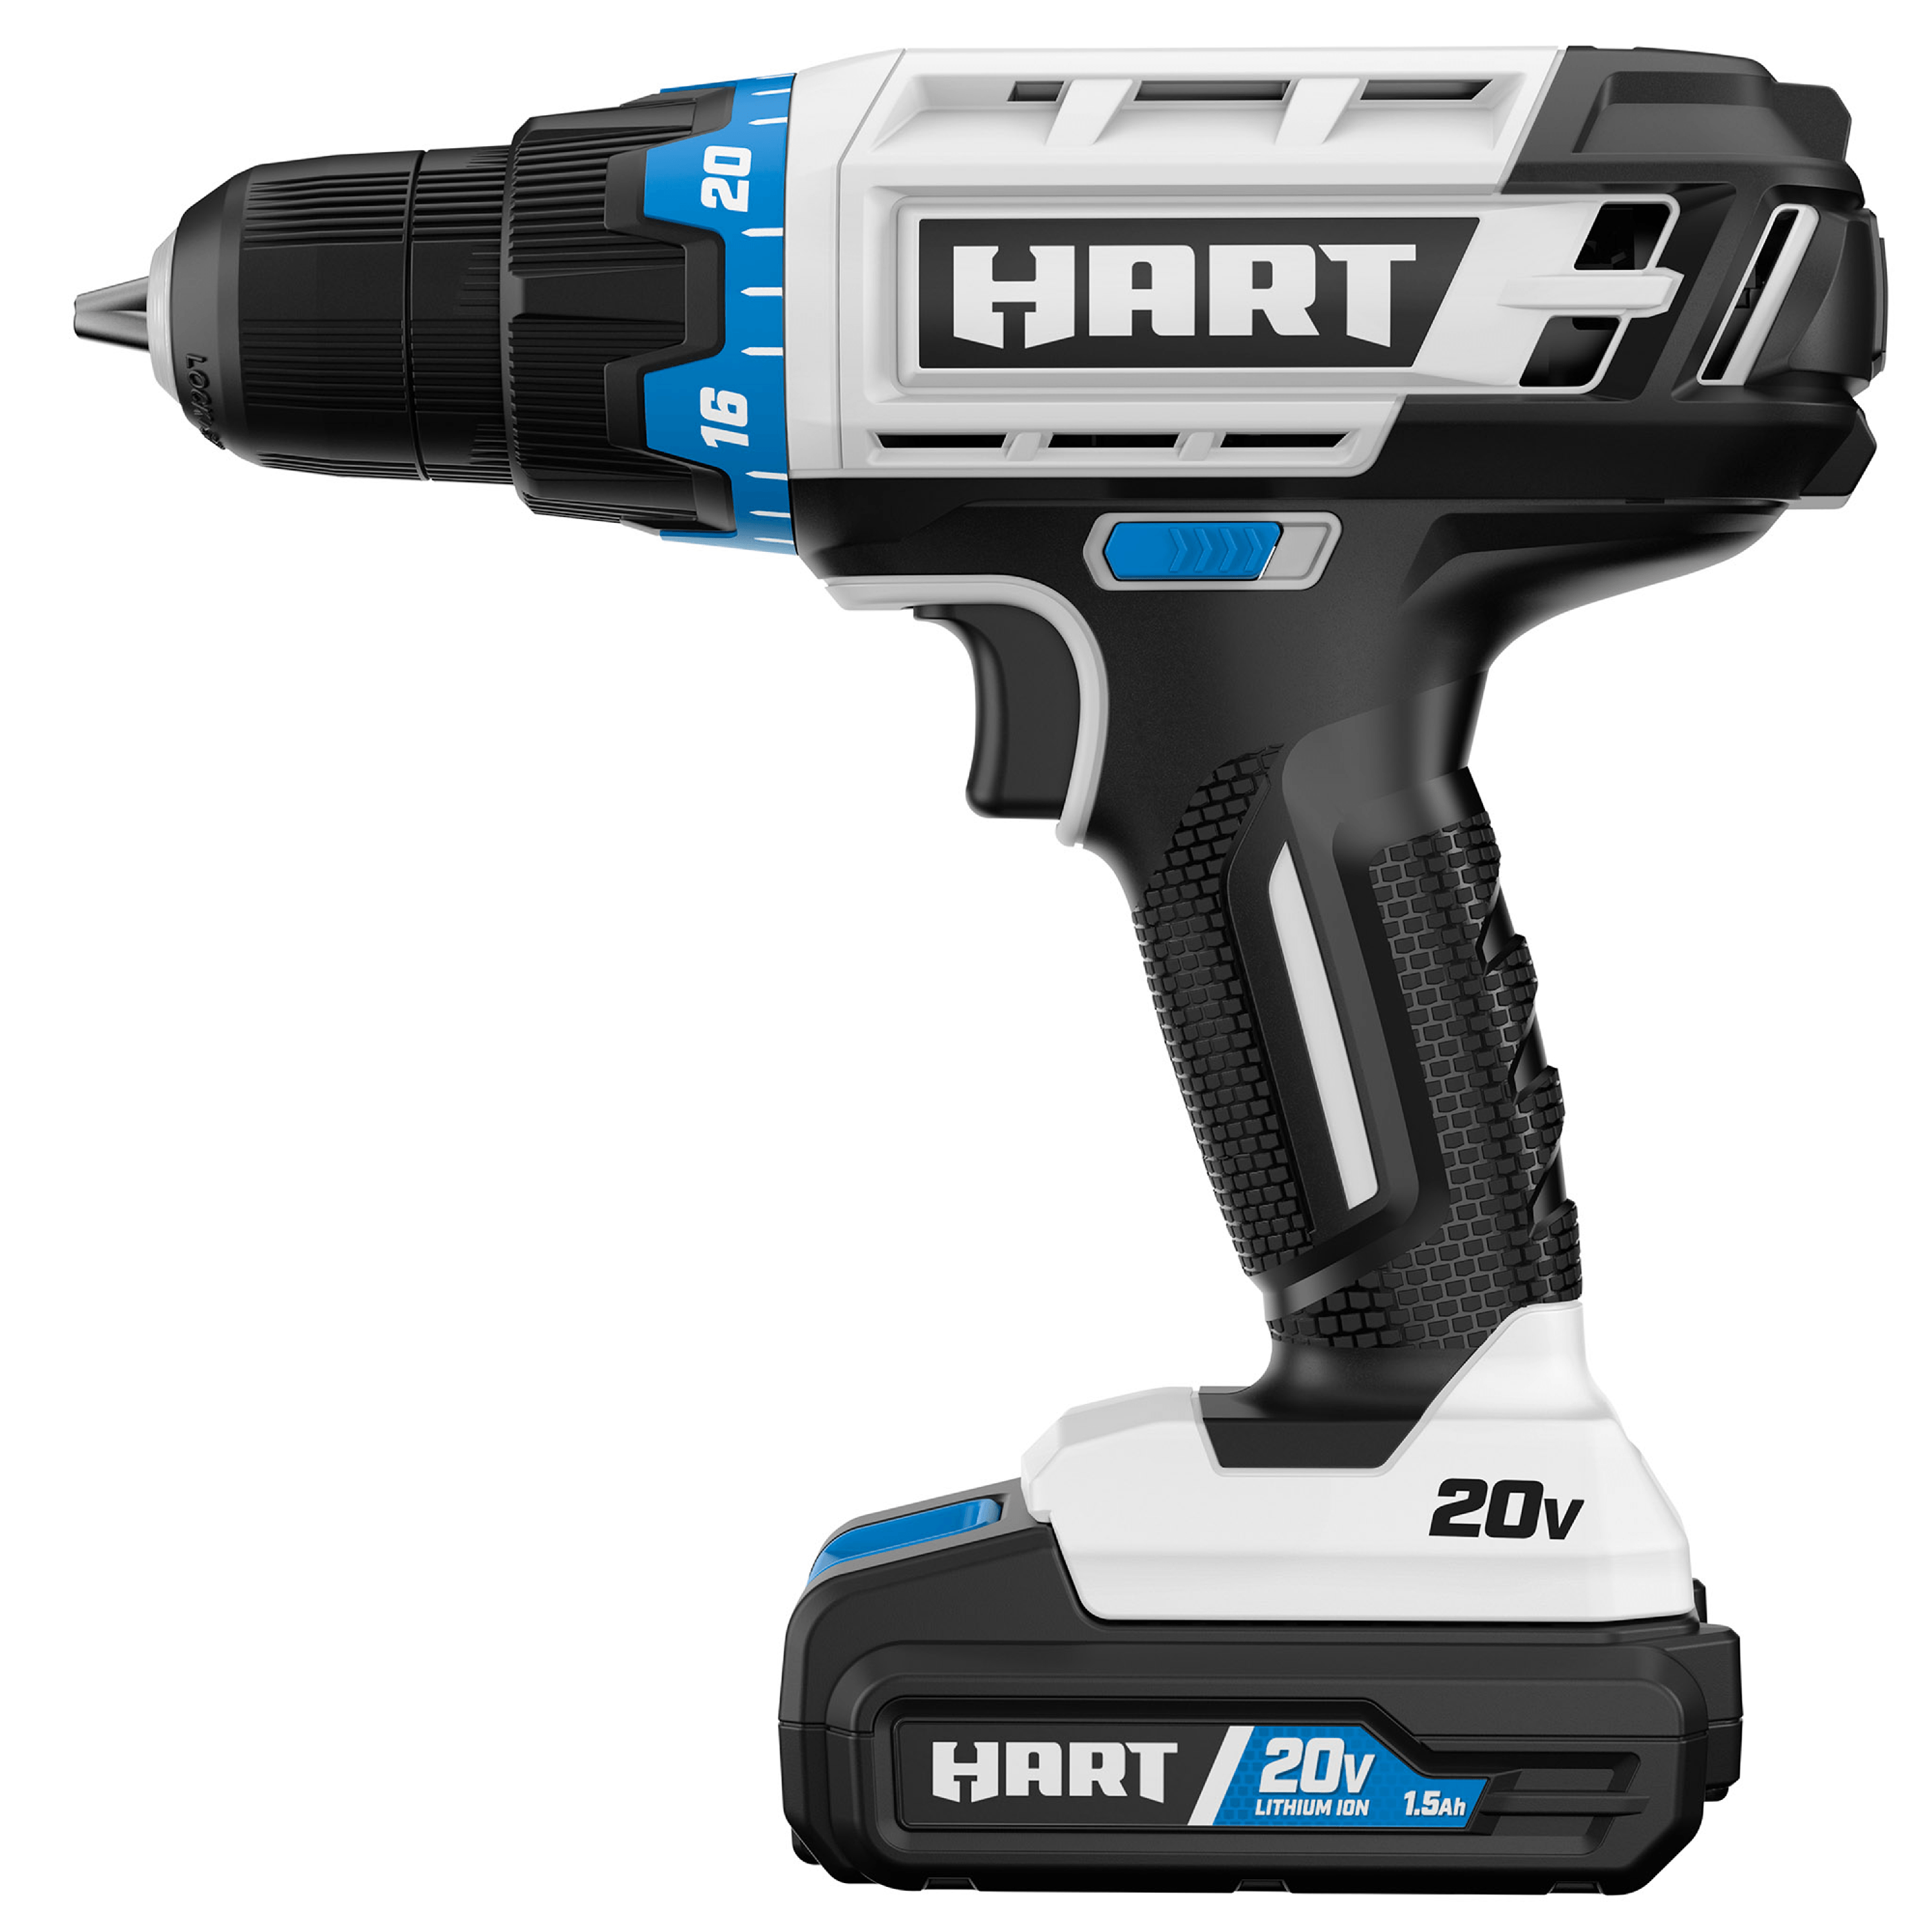 HART 20-Volt 36-Piece Project Kit, Cordless 3/8-inch Drill, Storage Bag, (1) 1.5Ah Lithium-Ion Battery - image 6 of 14